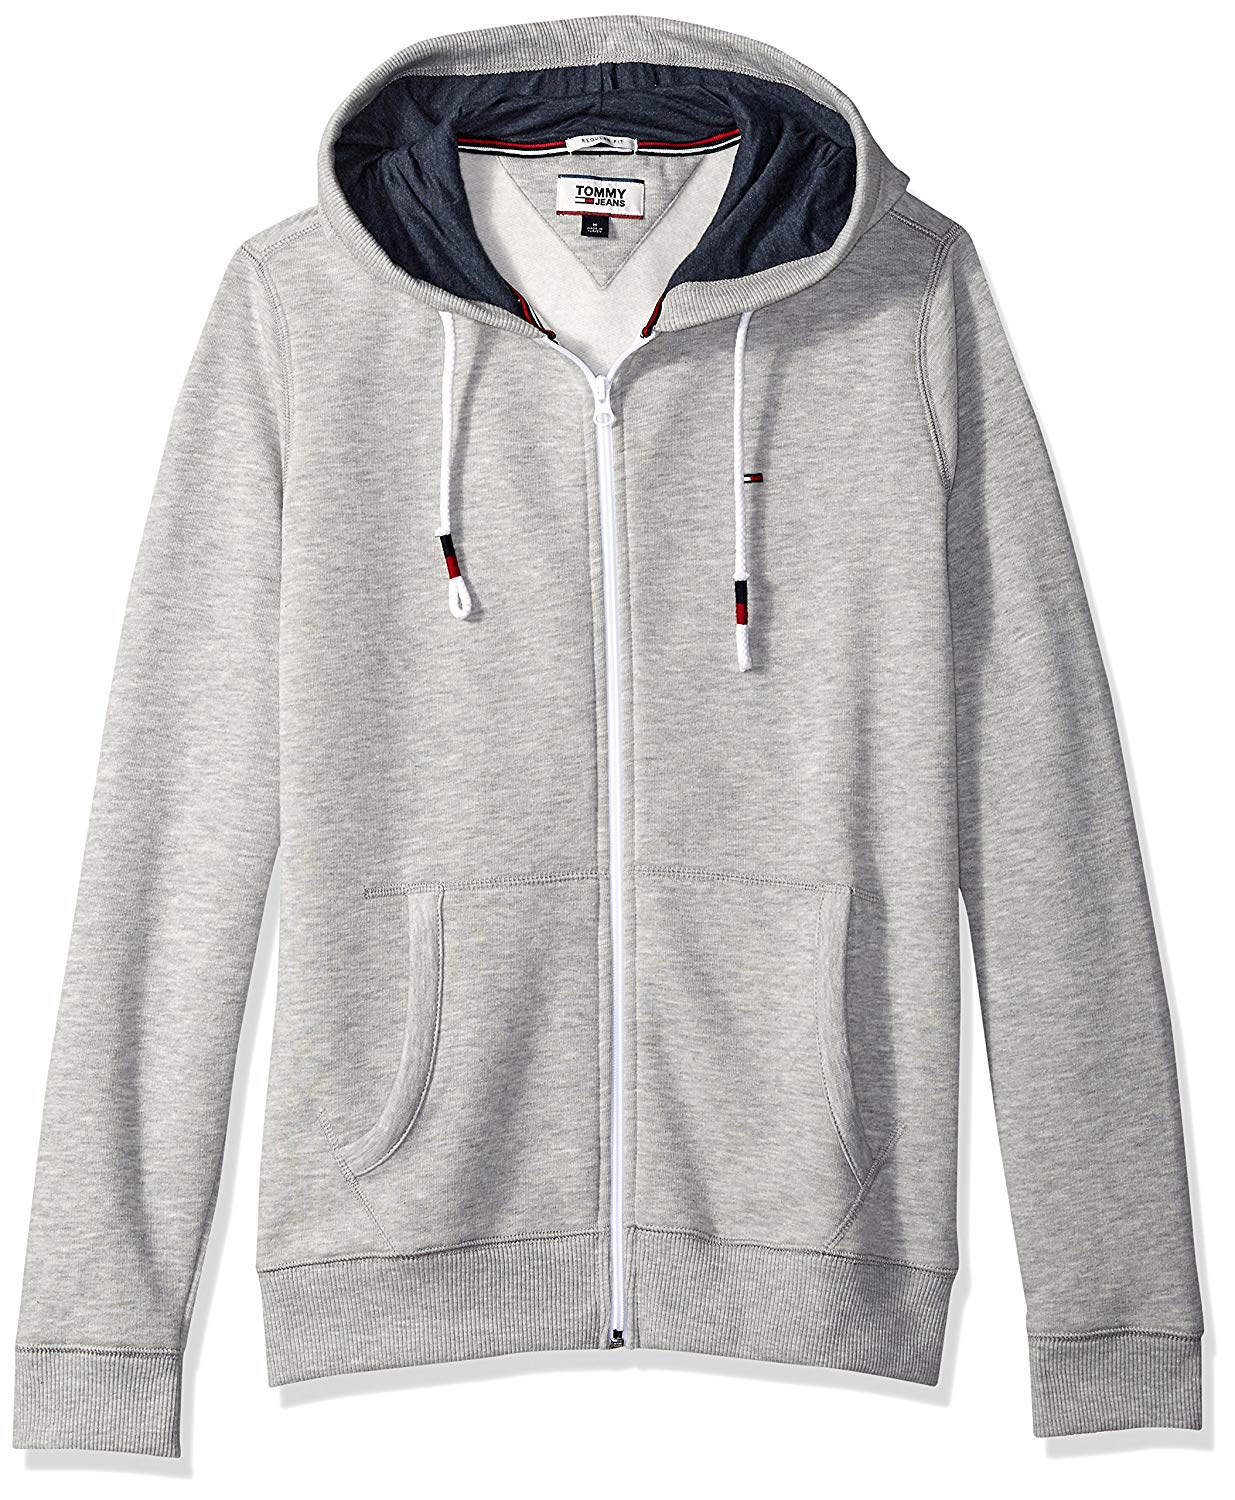 21 Cool Hoodies for Men: The Ultimate List (2022) | Heavy.com